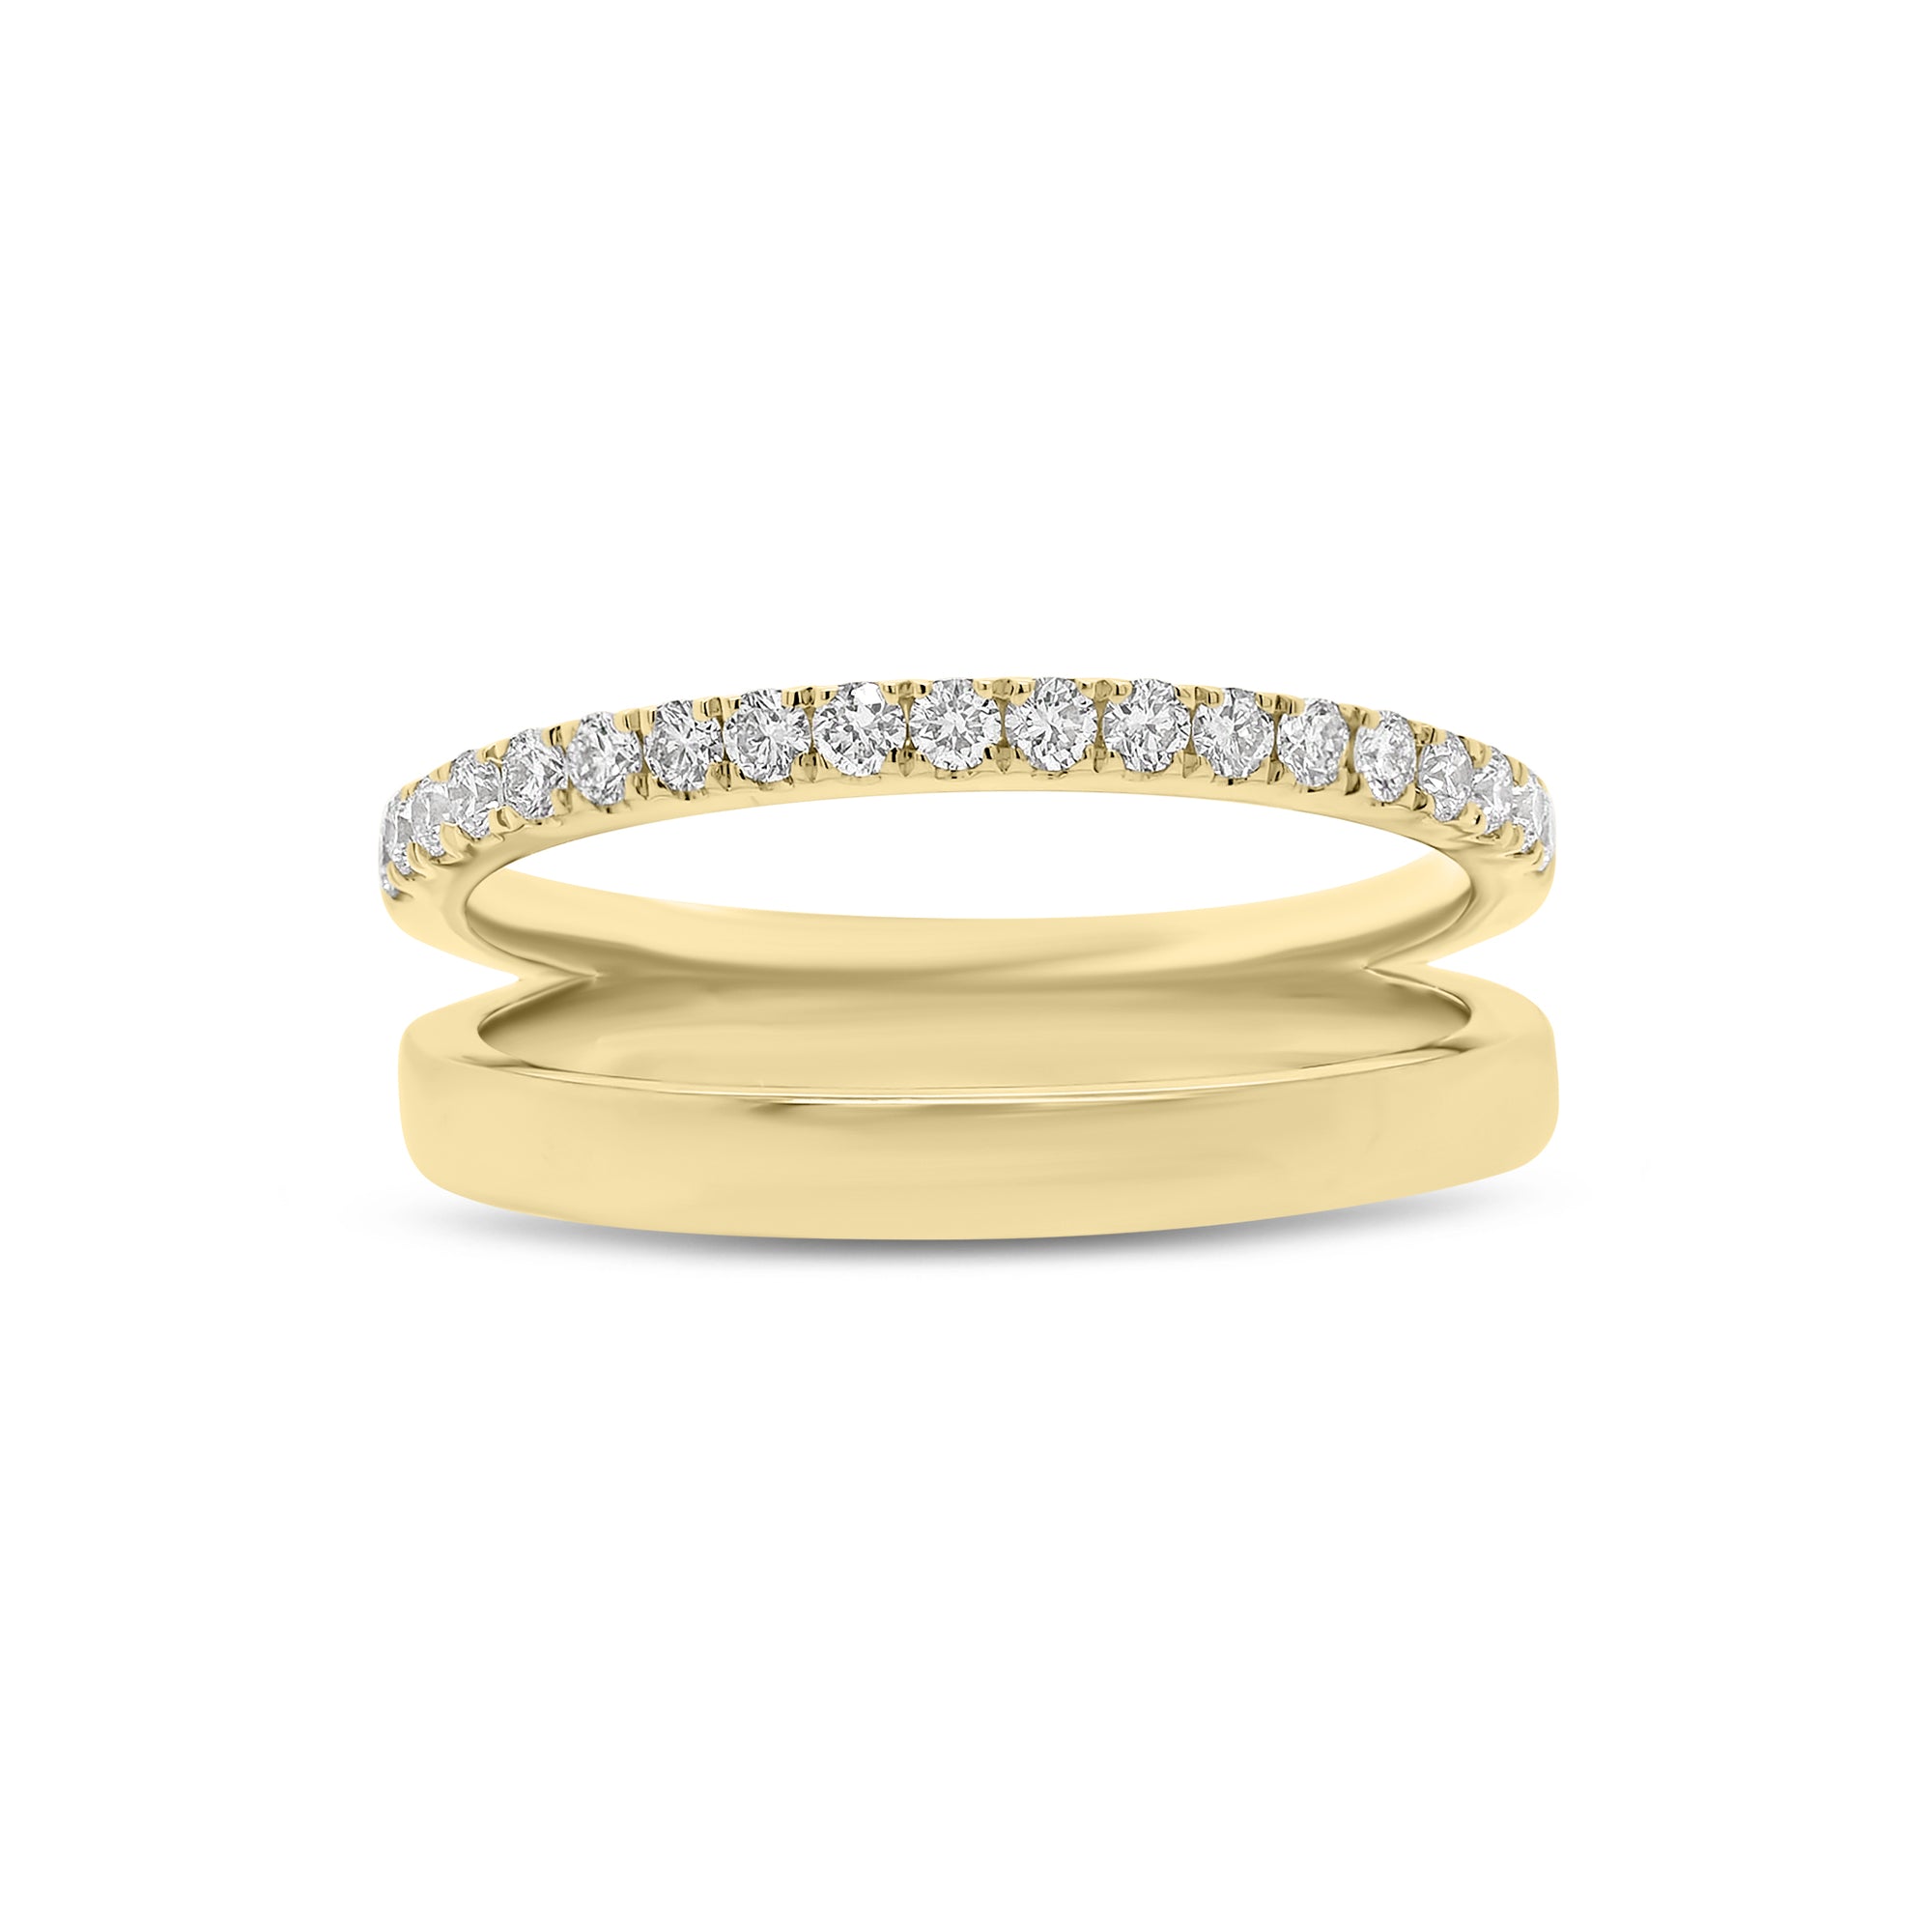 Diamond Double-Banded Open Ring - 14K gold weighing 3.74 grams  - 19 round diamonds weighing 0.28 carats